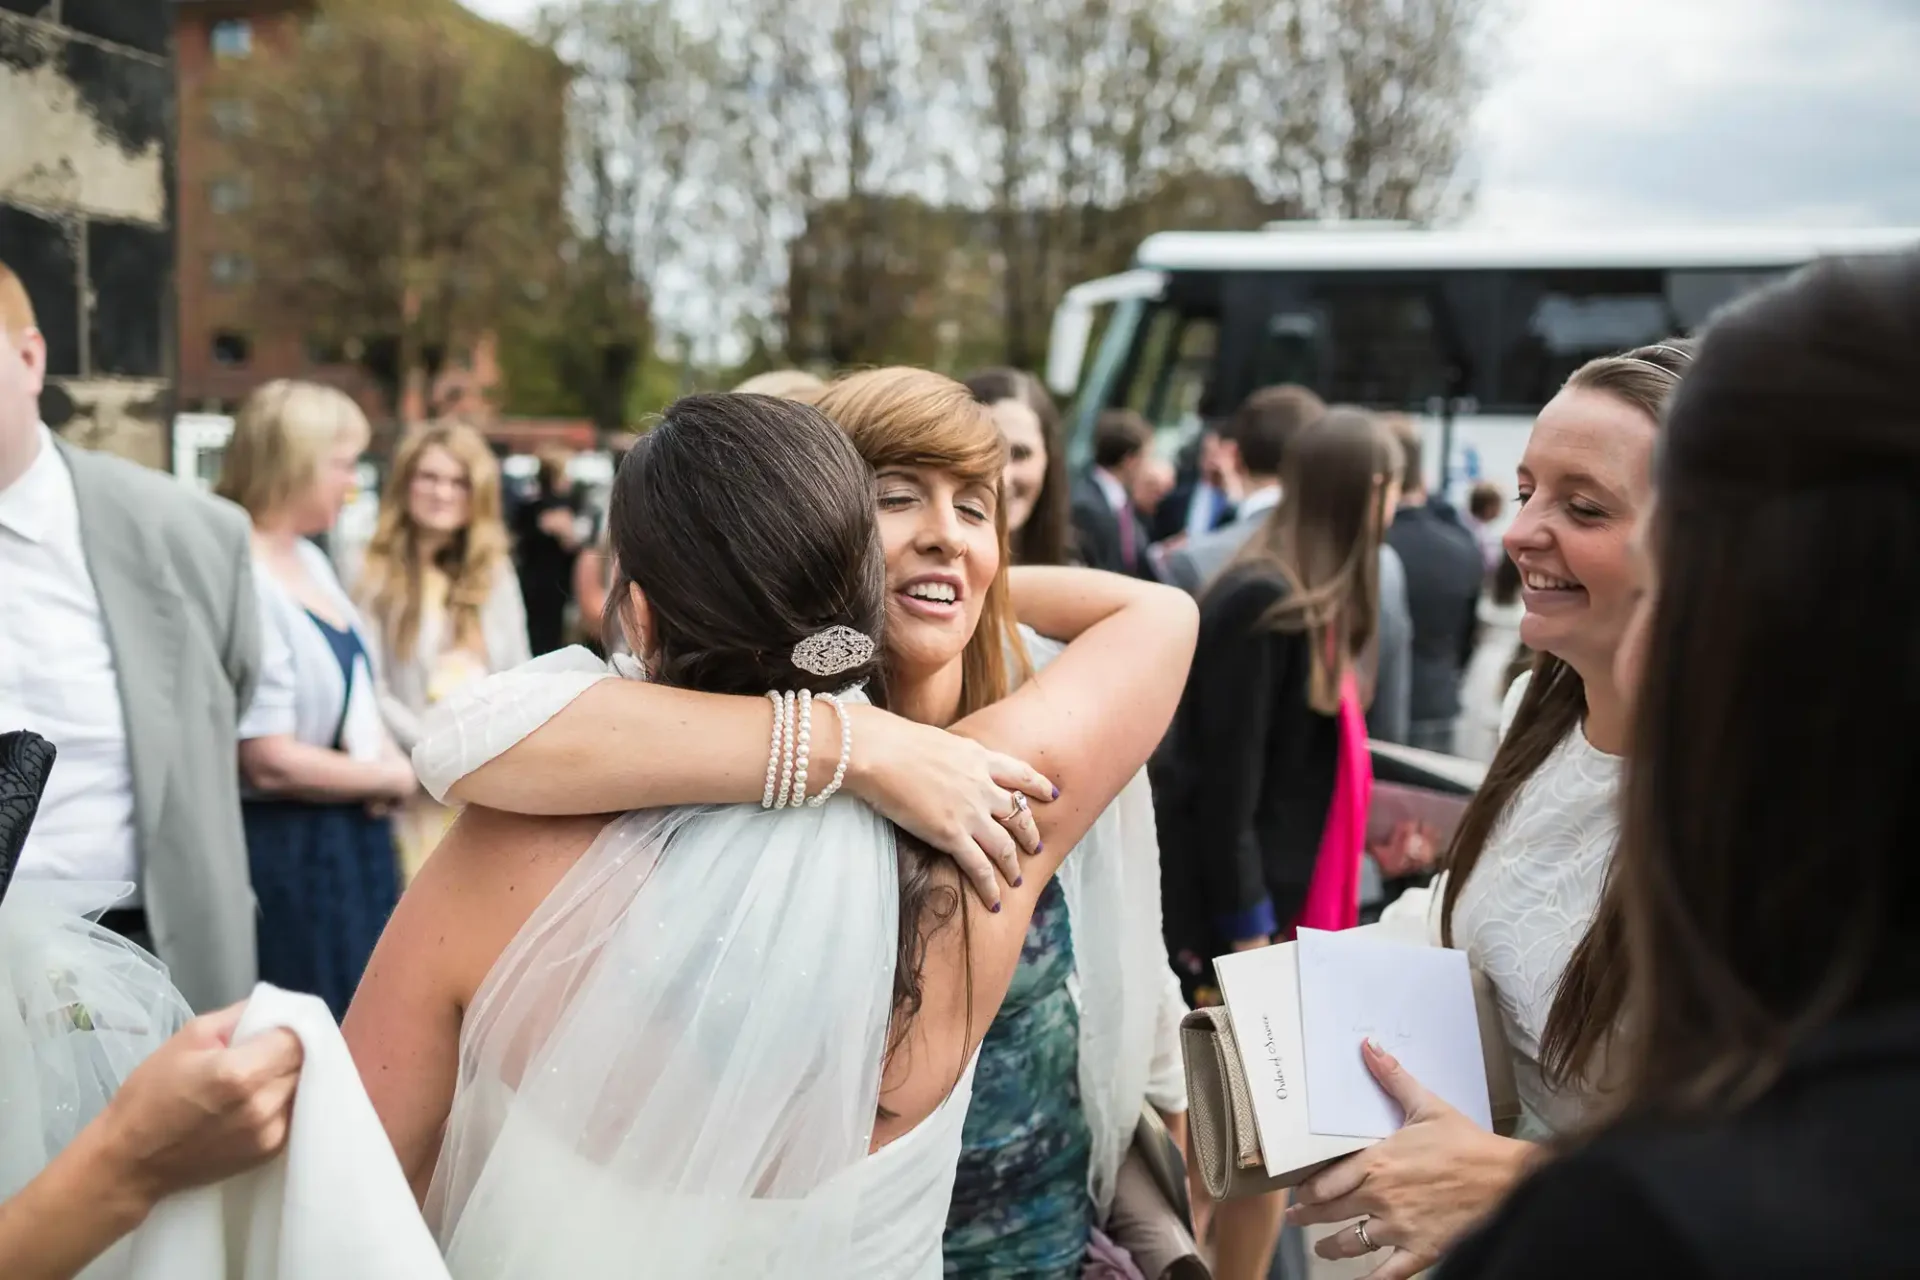 A bride hugs a guest at her wedding while other guests look on and smile in a lively outdoor gathering.